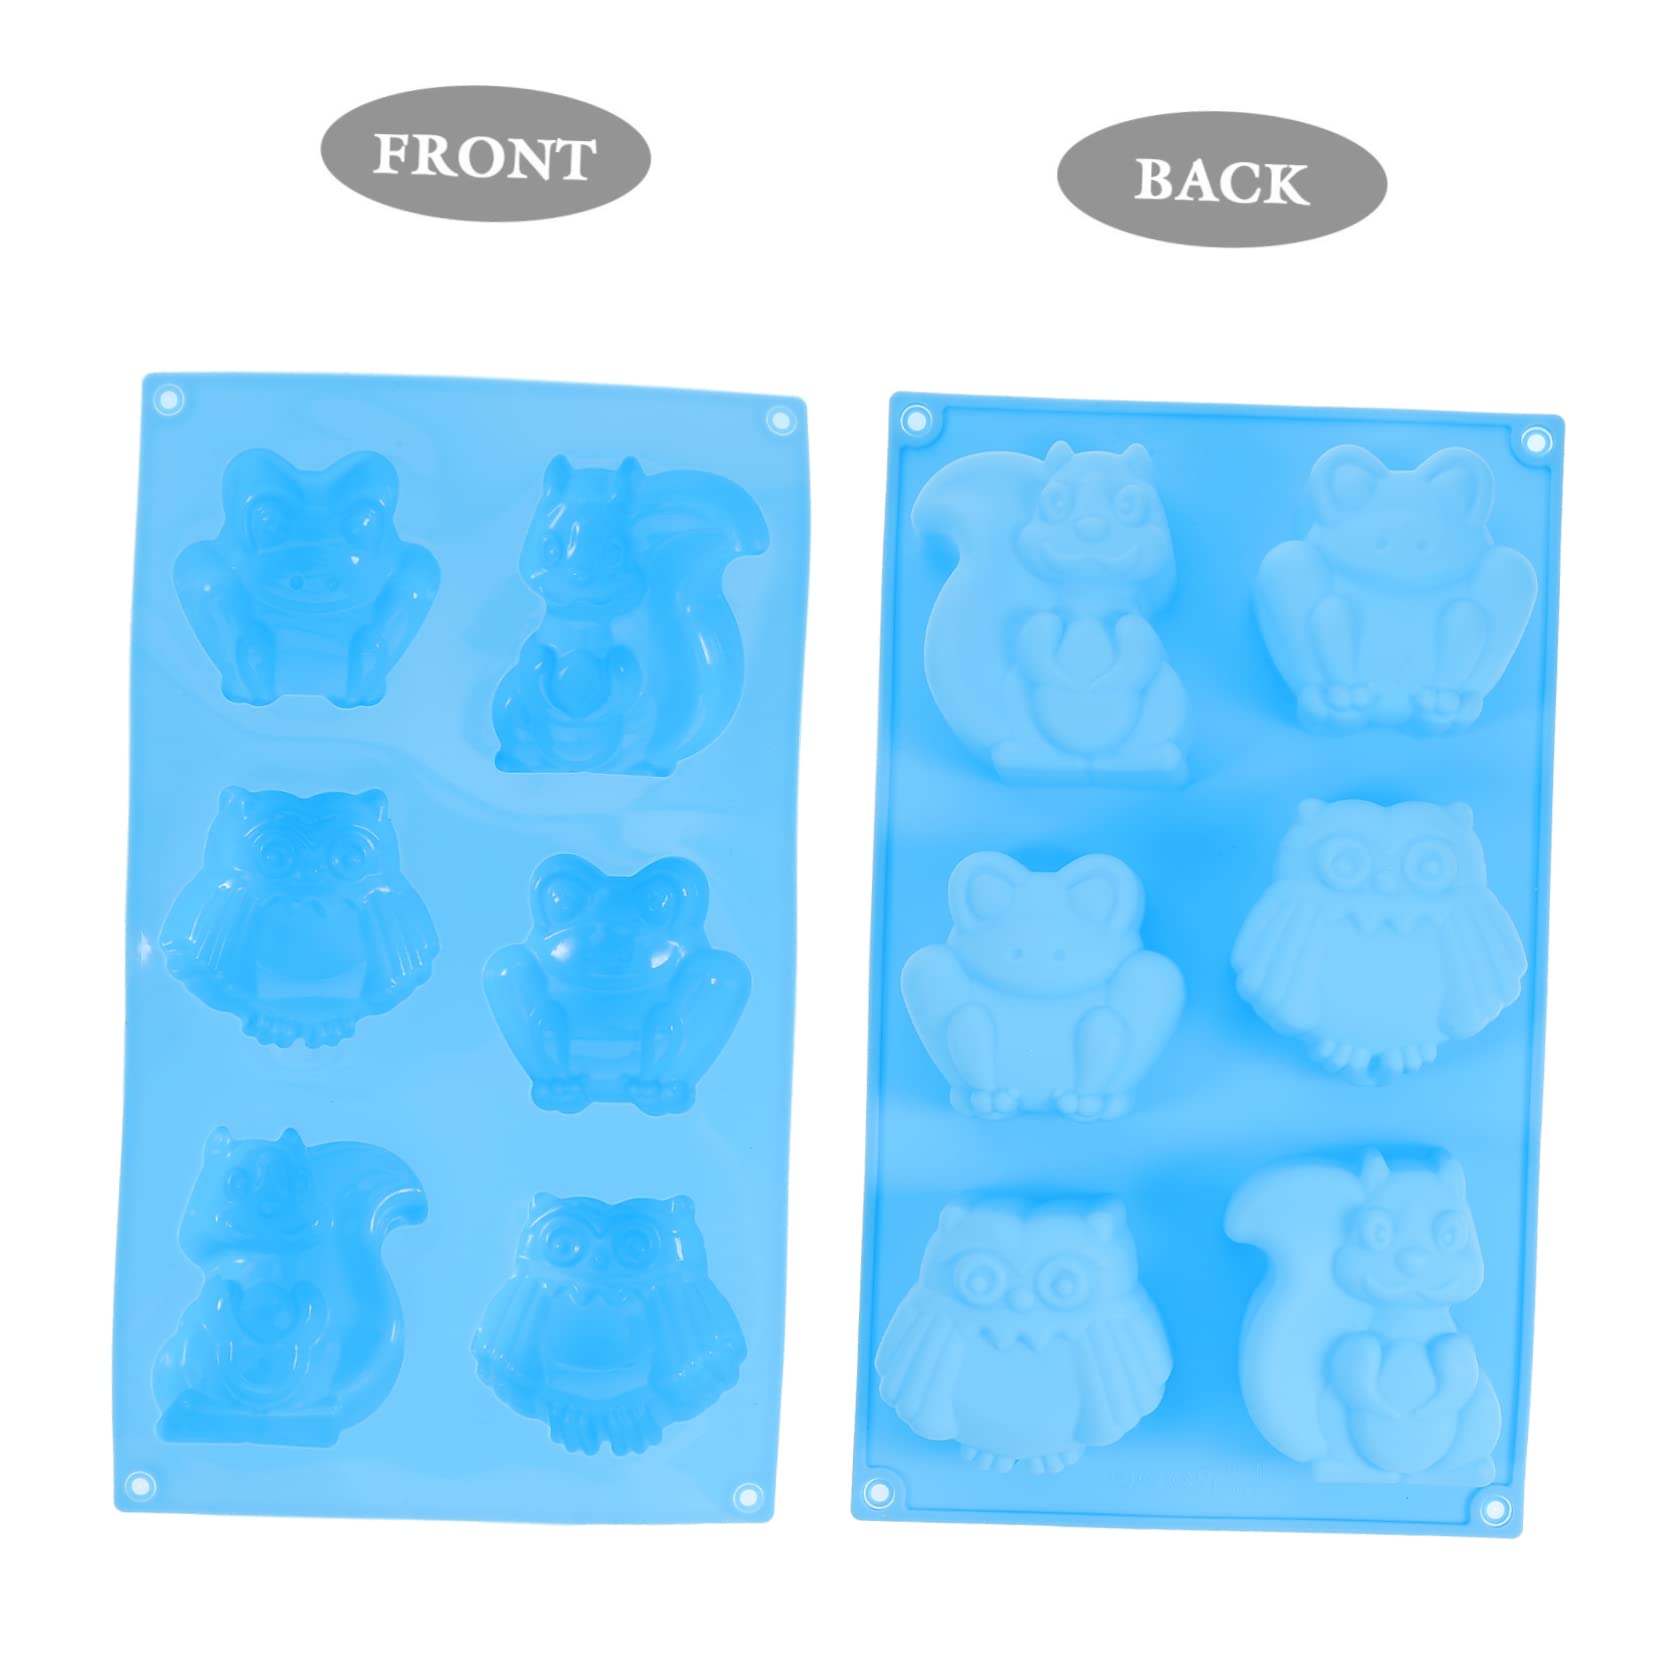 BESTOYARD 5pcs 6 Hole Silicone Muffin Pan Biscuit Molds Snowman Silicone Molds Pudding Dough Molds Silicone Ice Molds Cupcake Molds Christmas Cake Molds Non Stick Tray Silica Gel